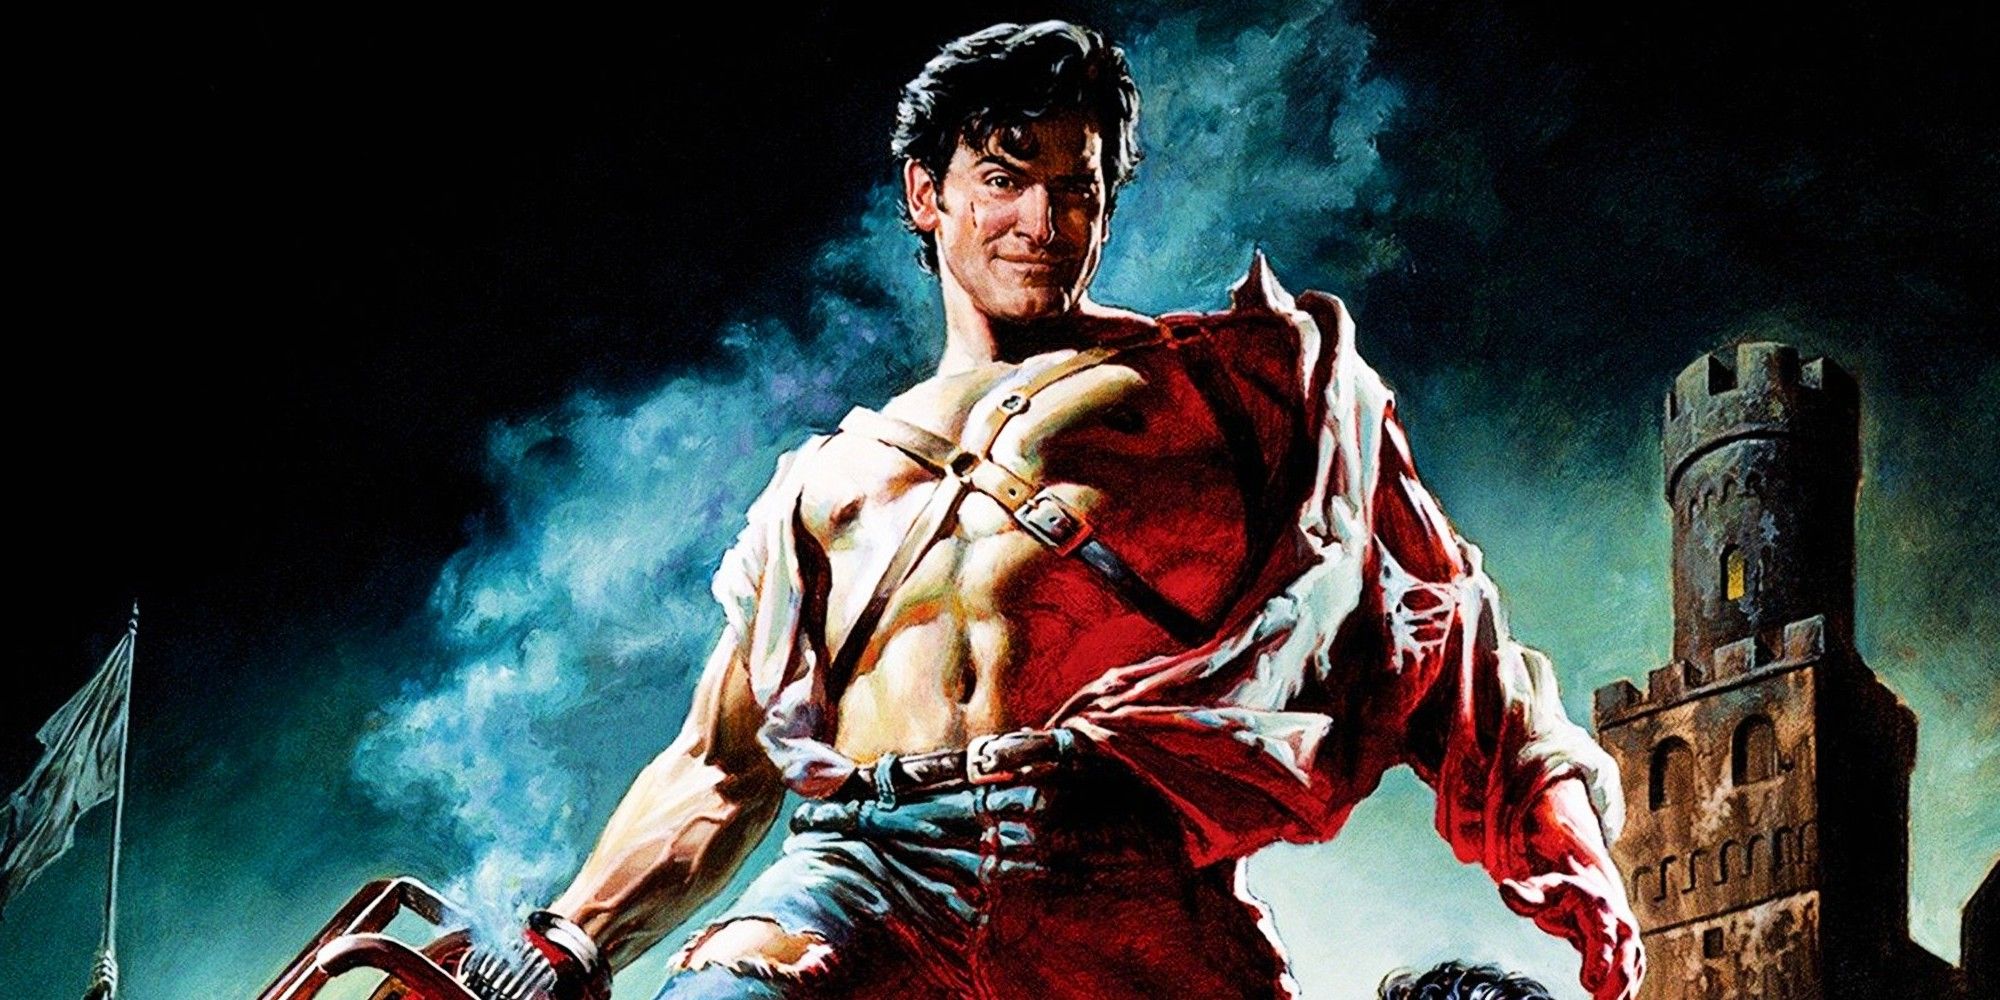 Bruce Campbell as Ash in Army of Darkness Movie Poster